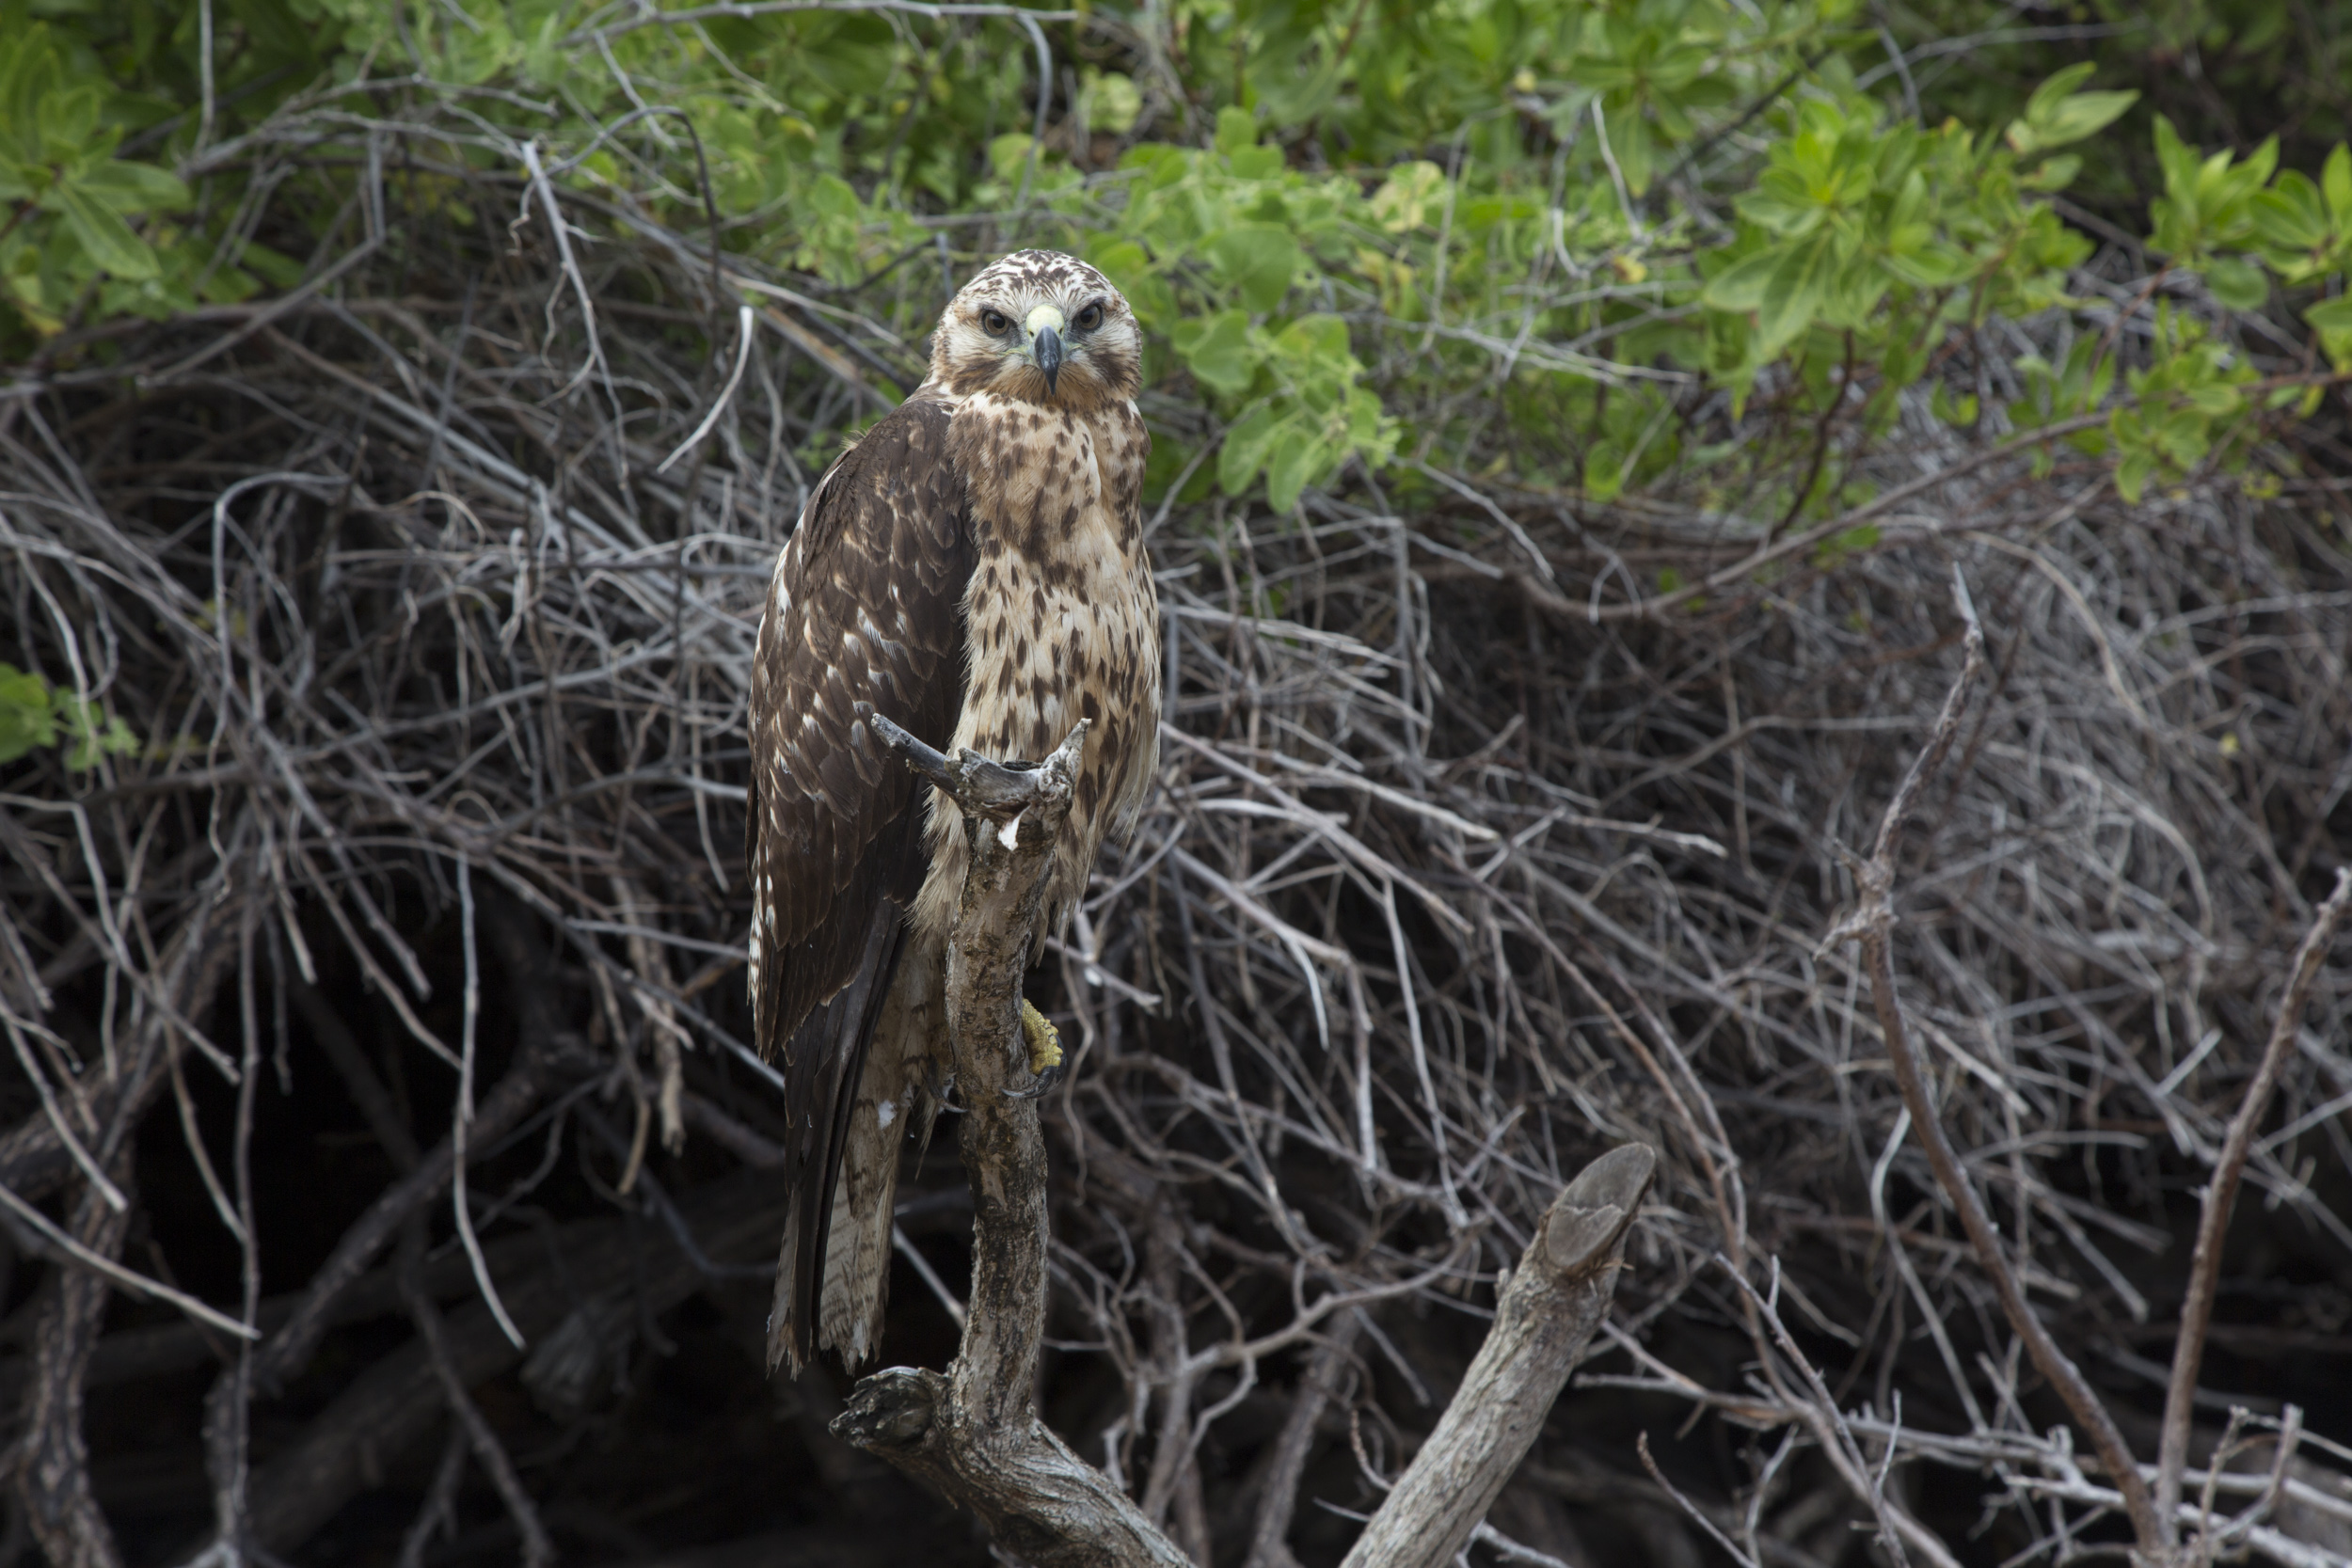 Wild Galapagos hawk – totally unperturbed by our presence.